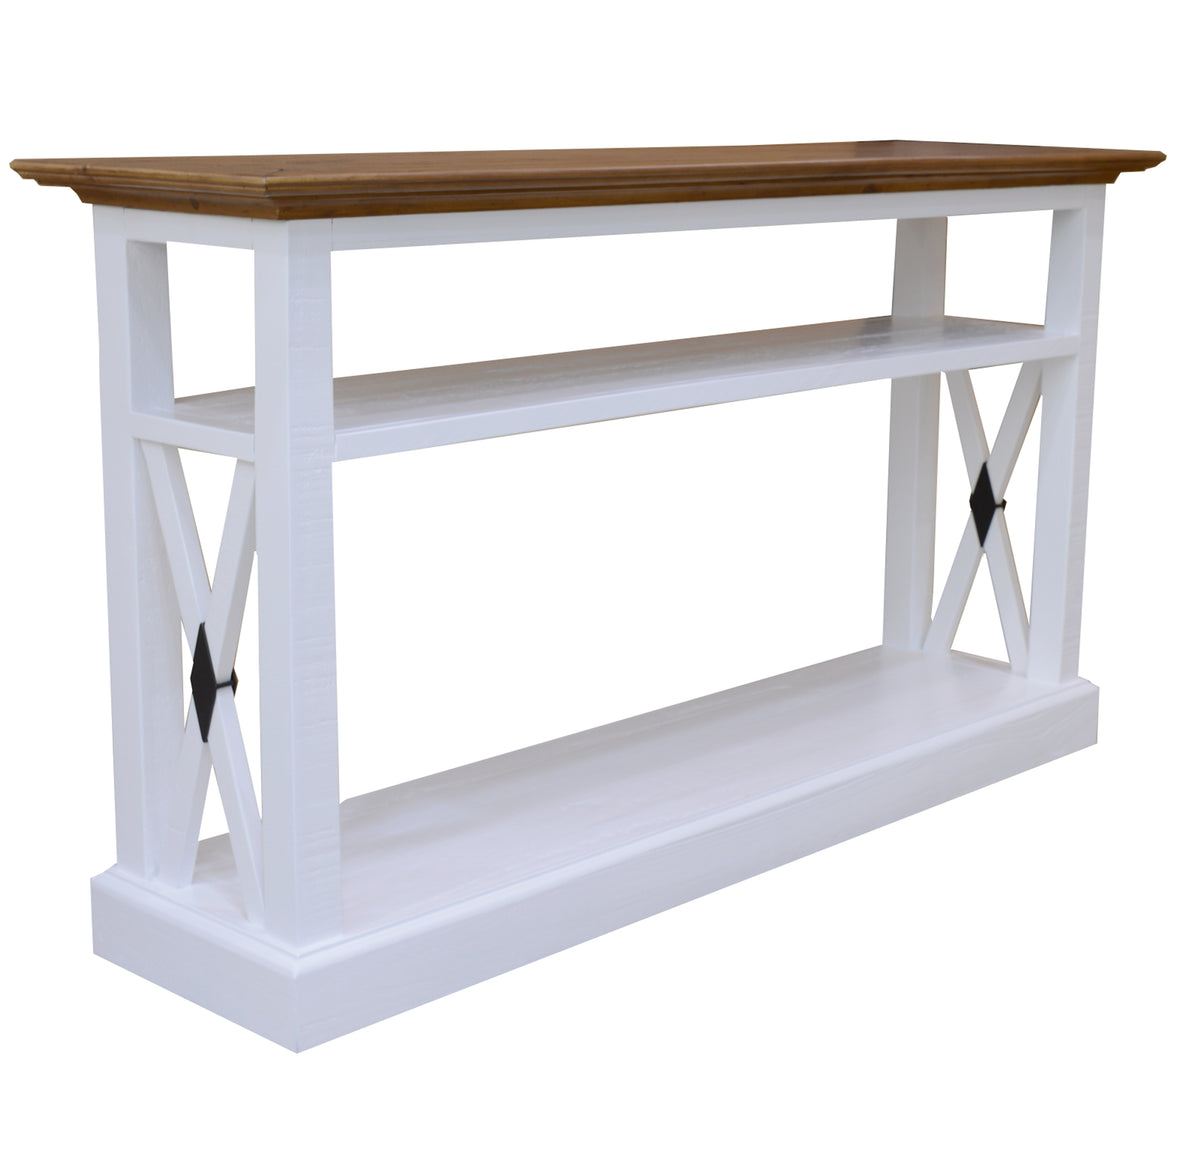 Beechworth Console Table with Solid Pine Wood in Grey - 140cm - Notbrand